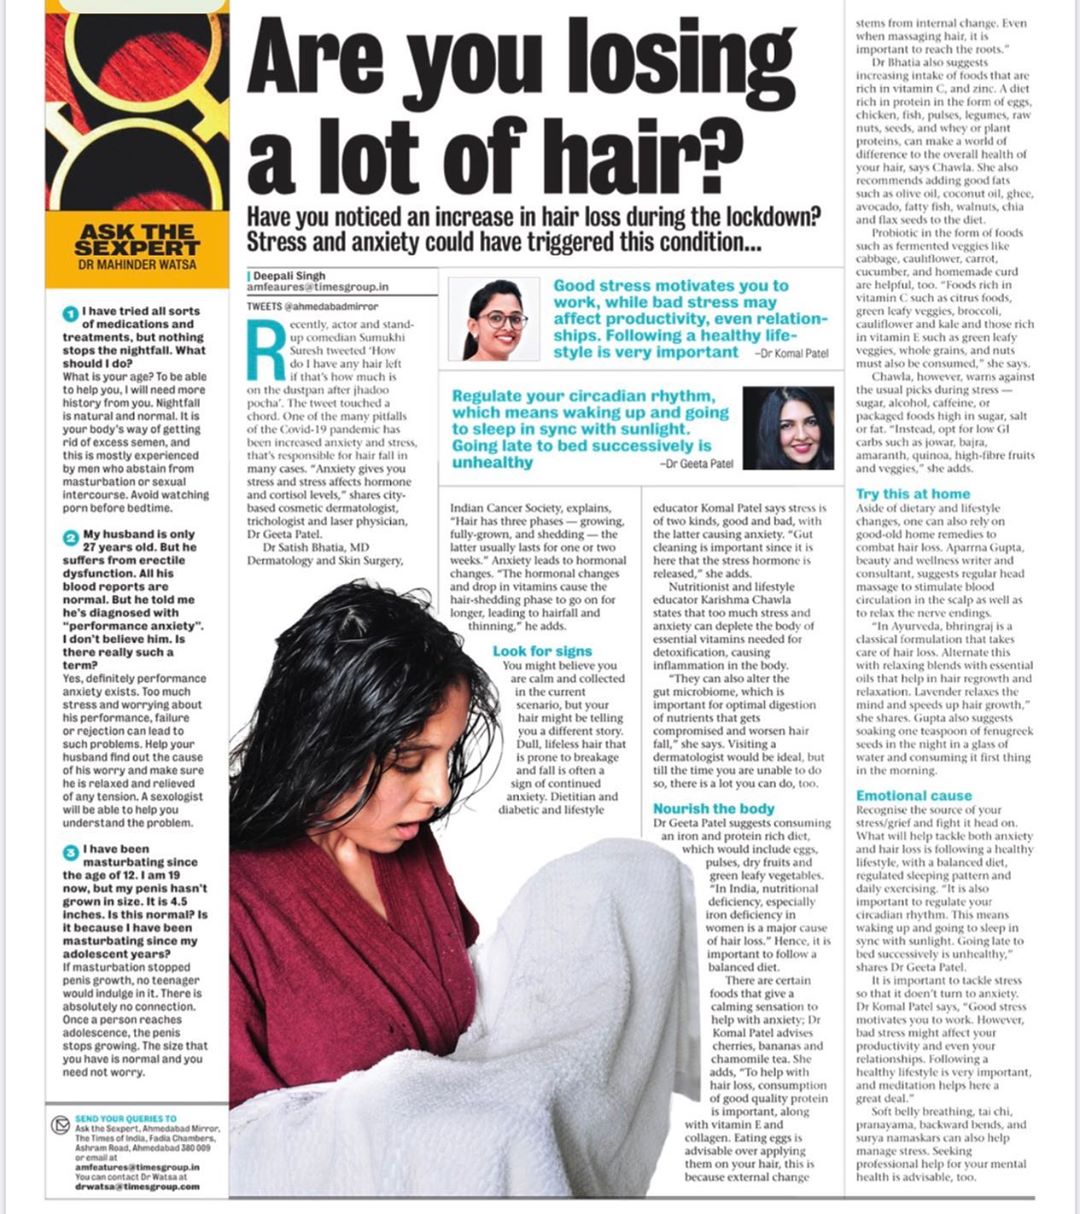 Today’s column in @ahmedabadmirrorofficial 
All about anxiety, stress and hair loss...
#komalpatel #dietitian #diabeticeducator #article #media